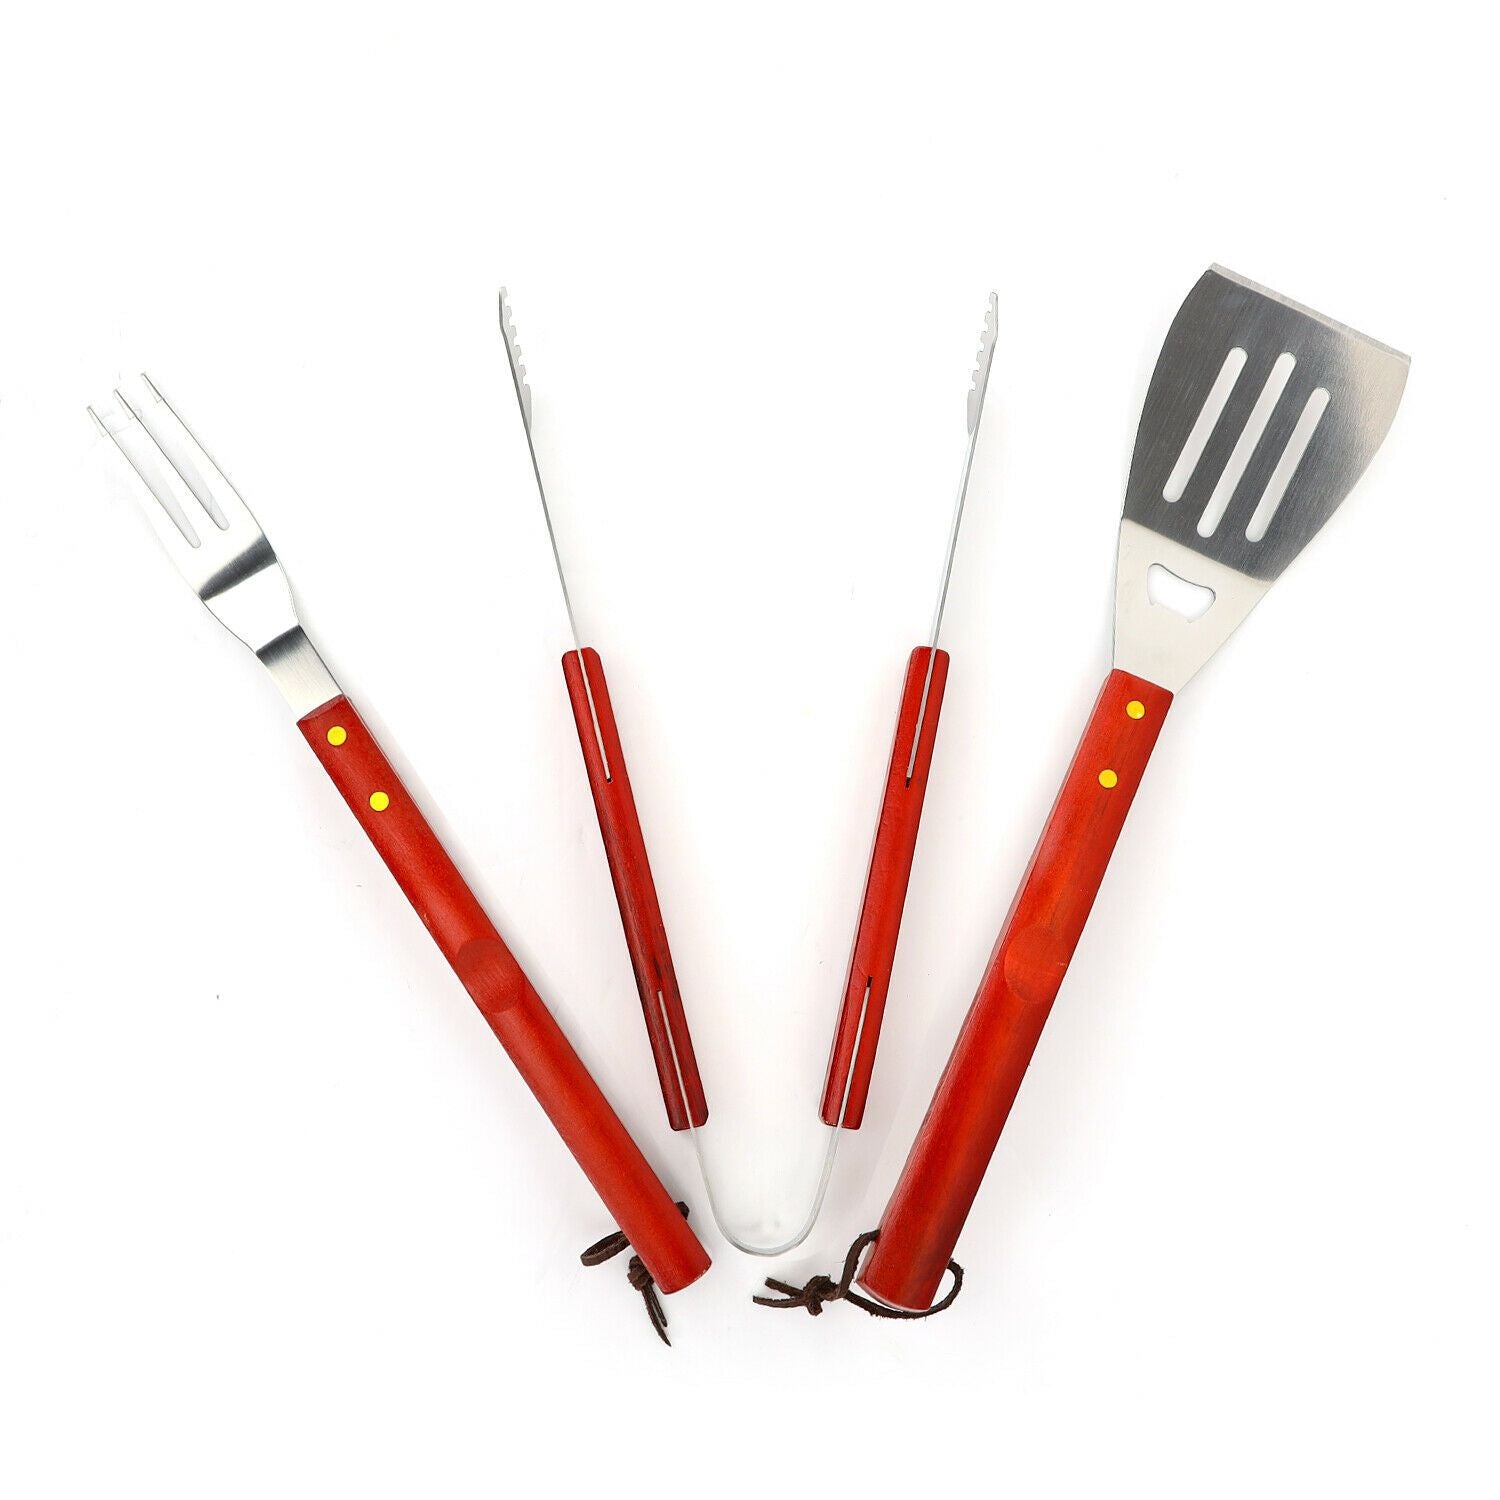 BBQ Stainless Steel Barbeque Utensils Grill Tool Set By Royalford Royalford 